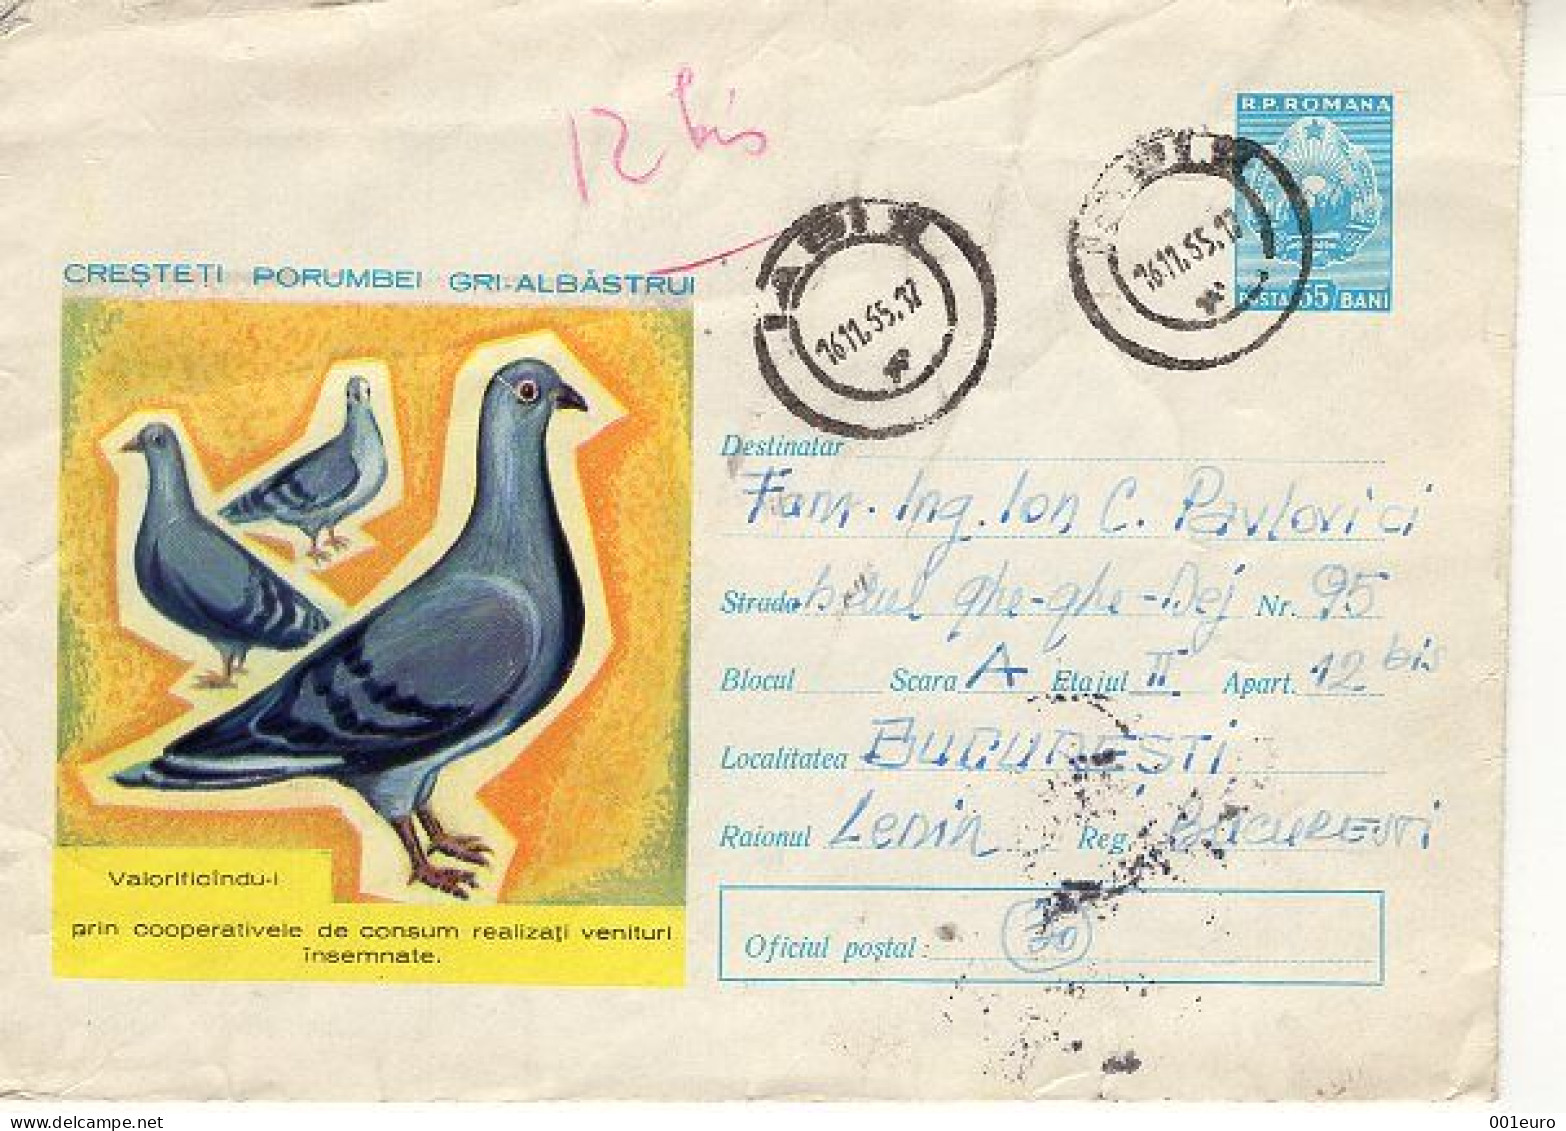 ROMANIA 393y1963: Birds - PIGEONS, Used Prepaid Postal Stationery Cover - Registered Shipping! - Enteros Postales